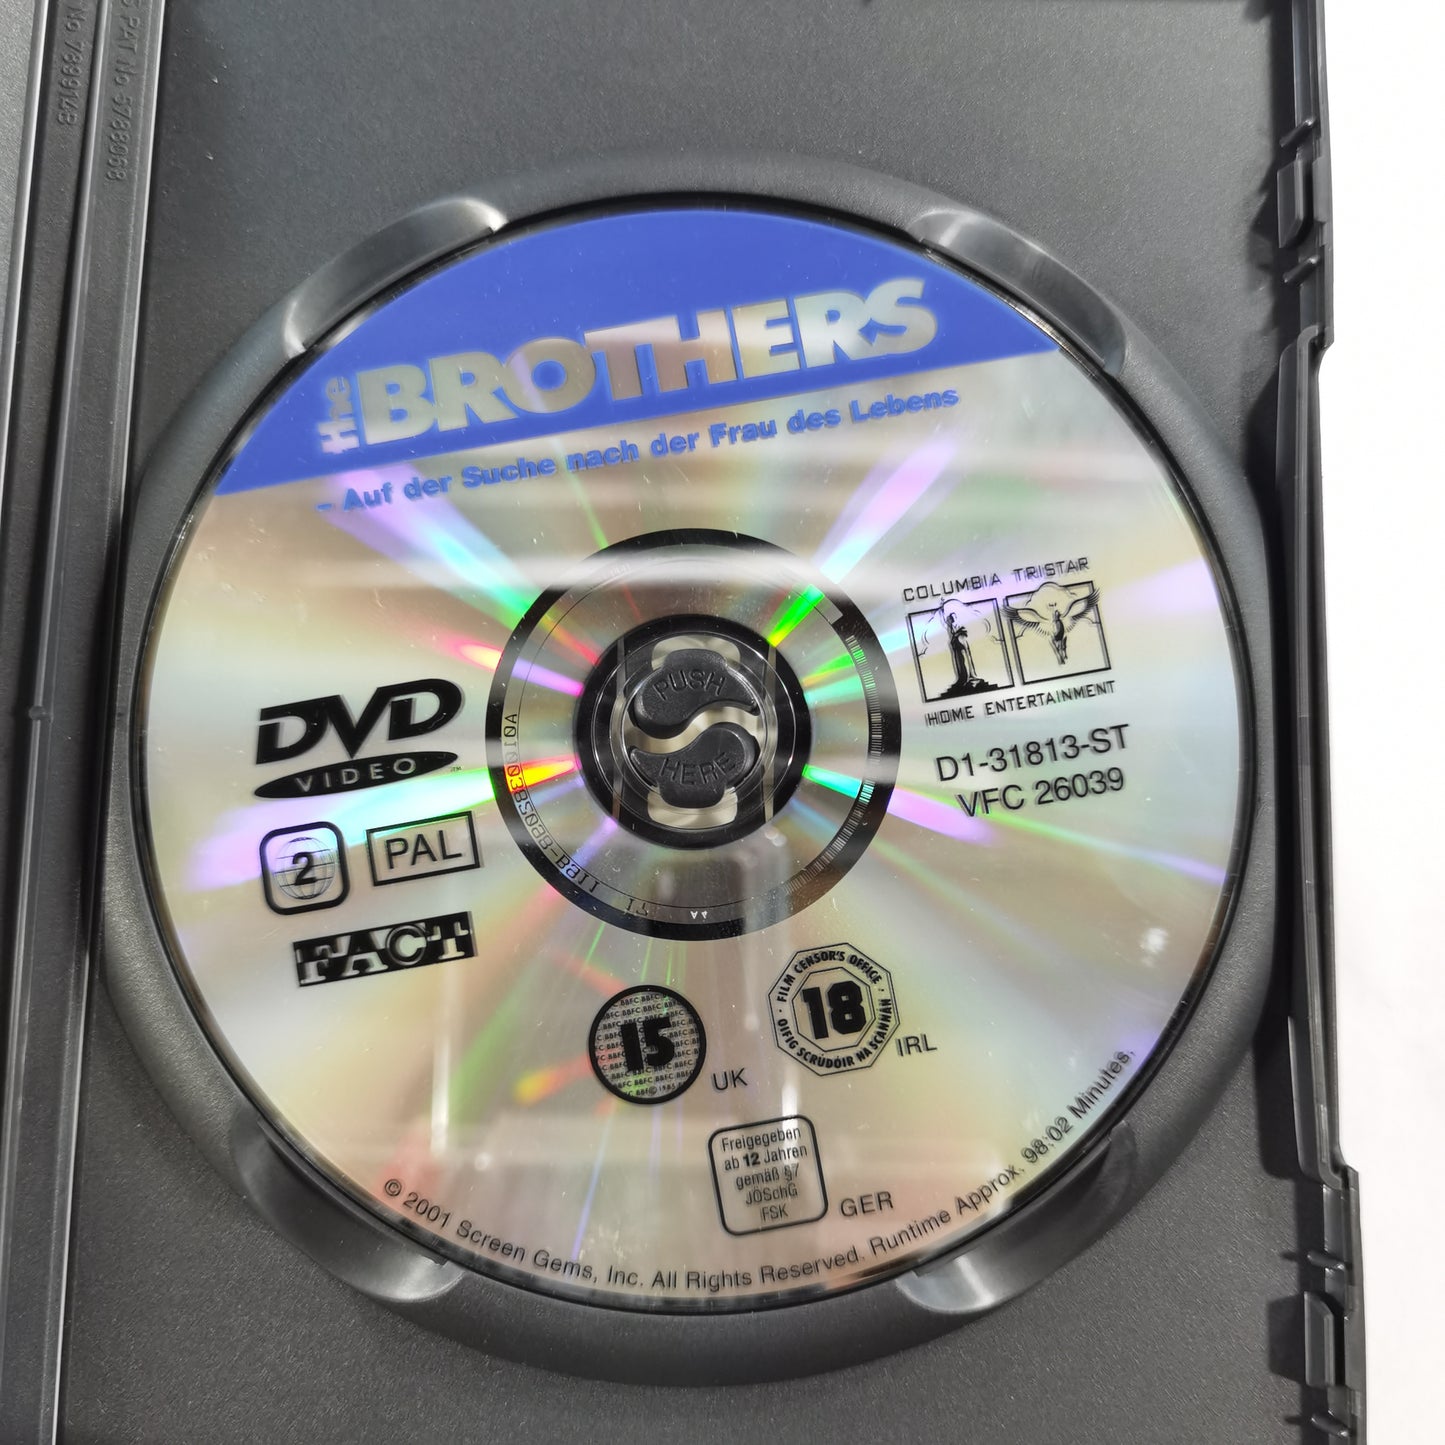 The Brothers (2001) - DVD SE 2001